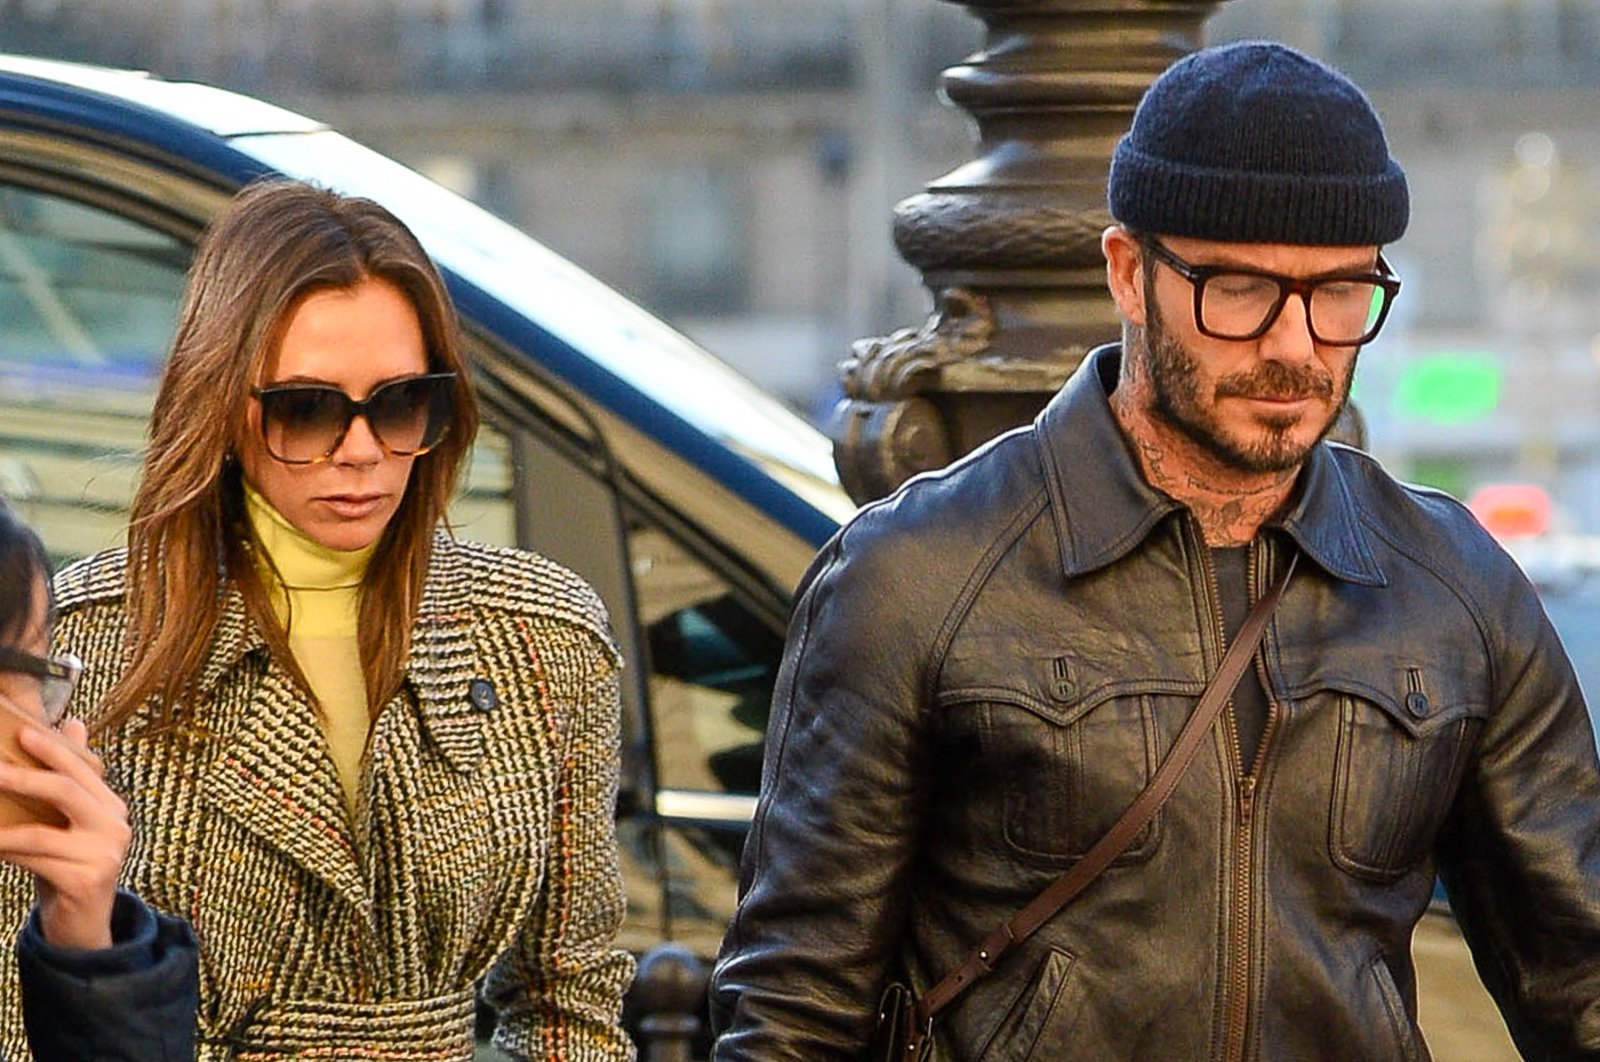 Victoria Beckham (R) and David Beckham are seen at Gare du Nord station, Paris, France, Jan. 18, 2020. (Getty Images Photo)